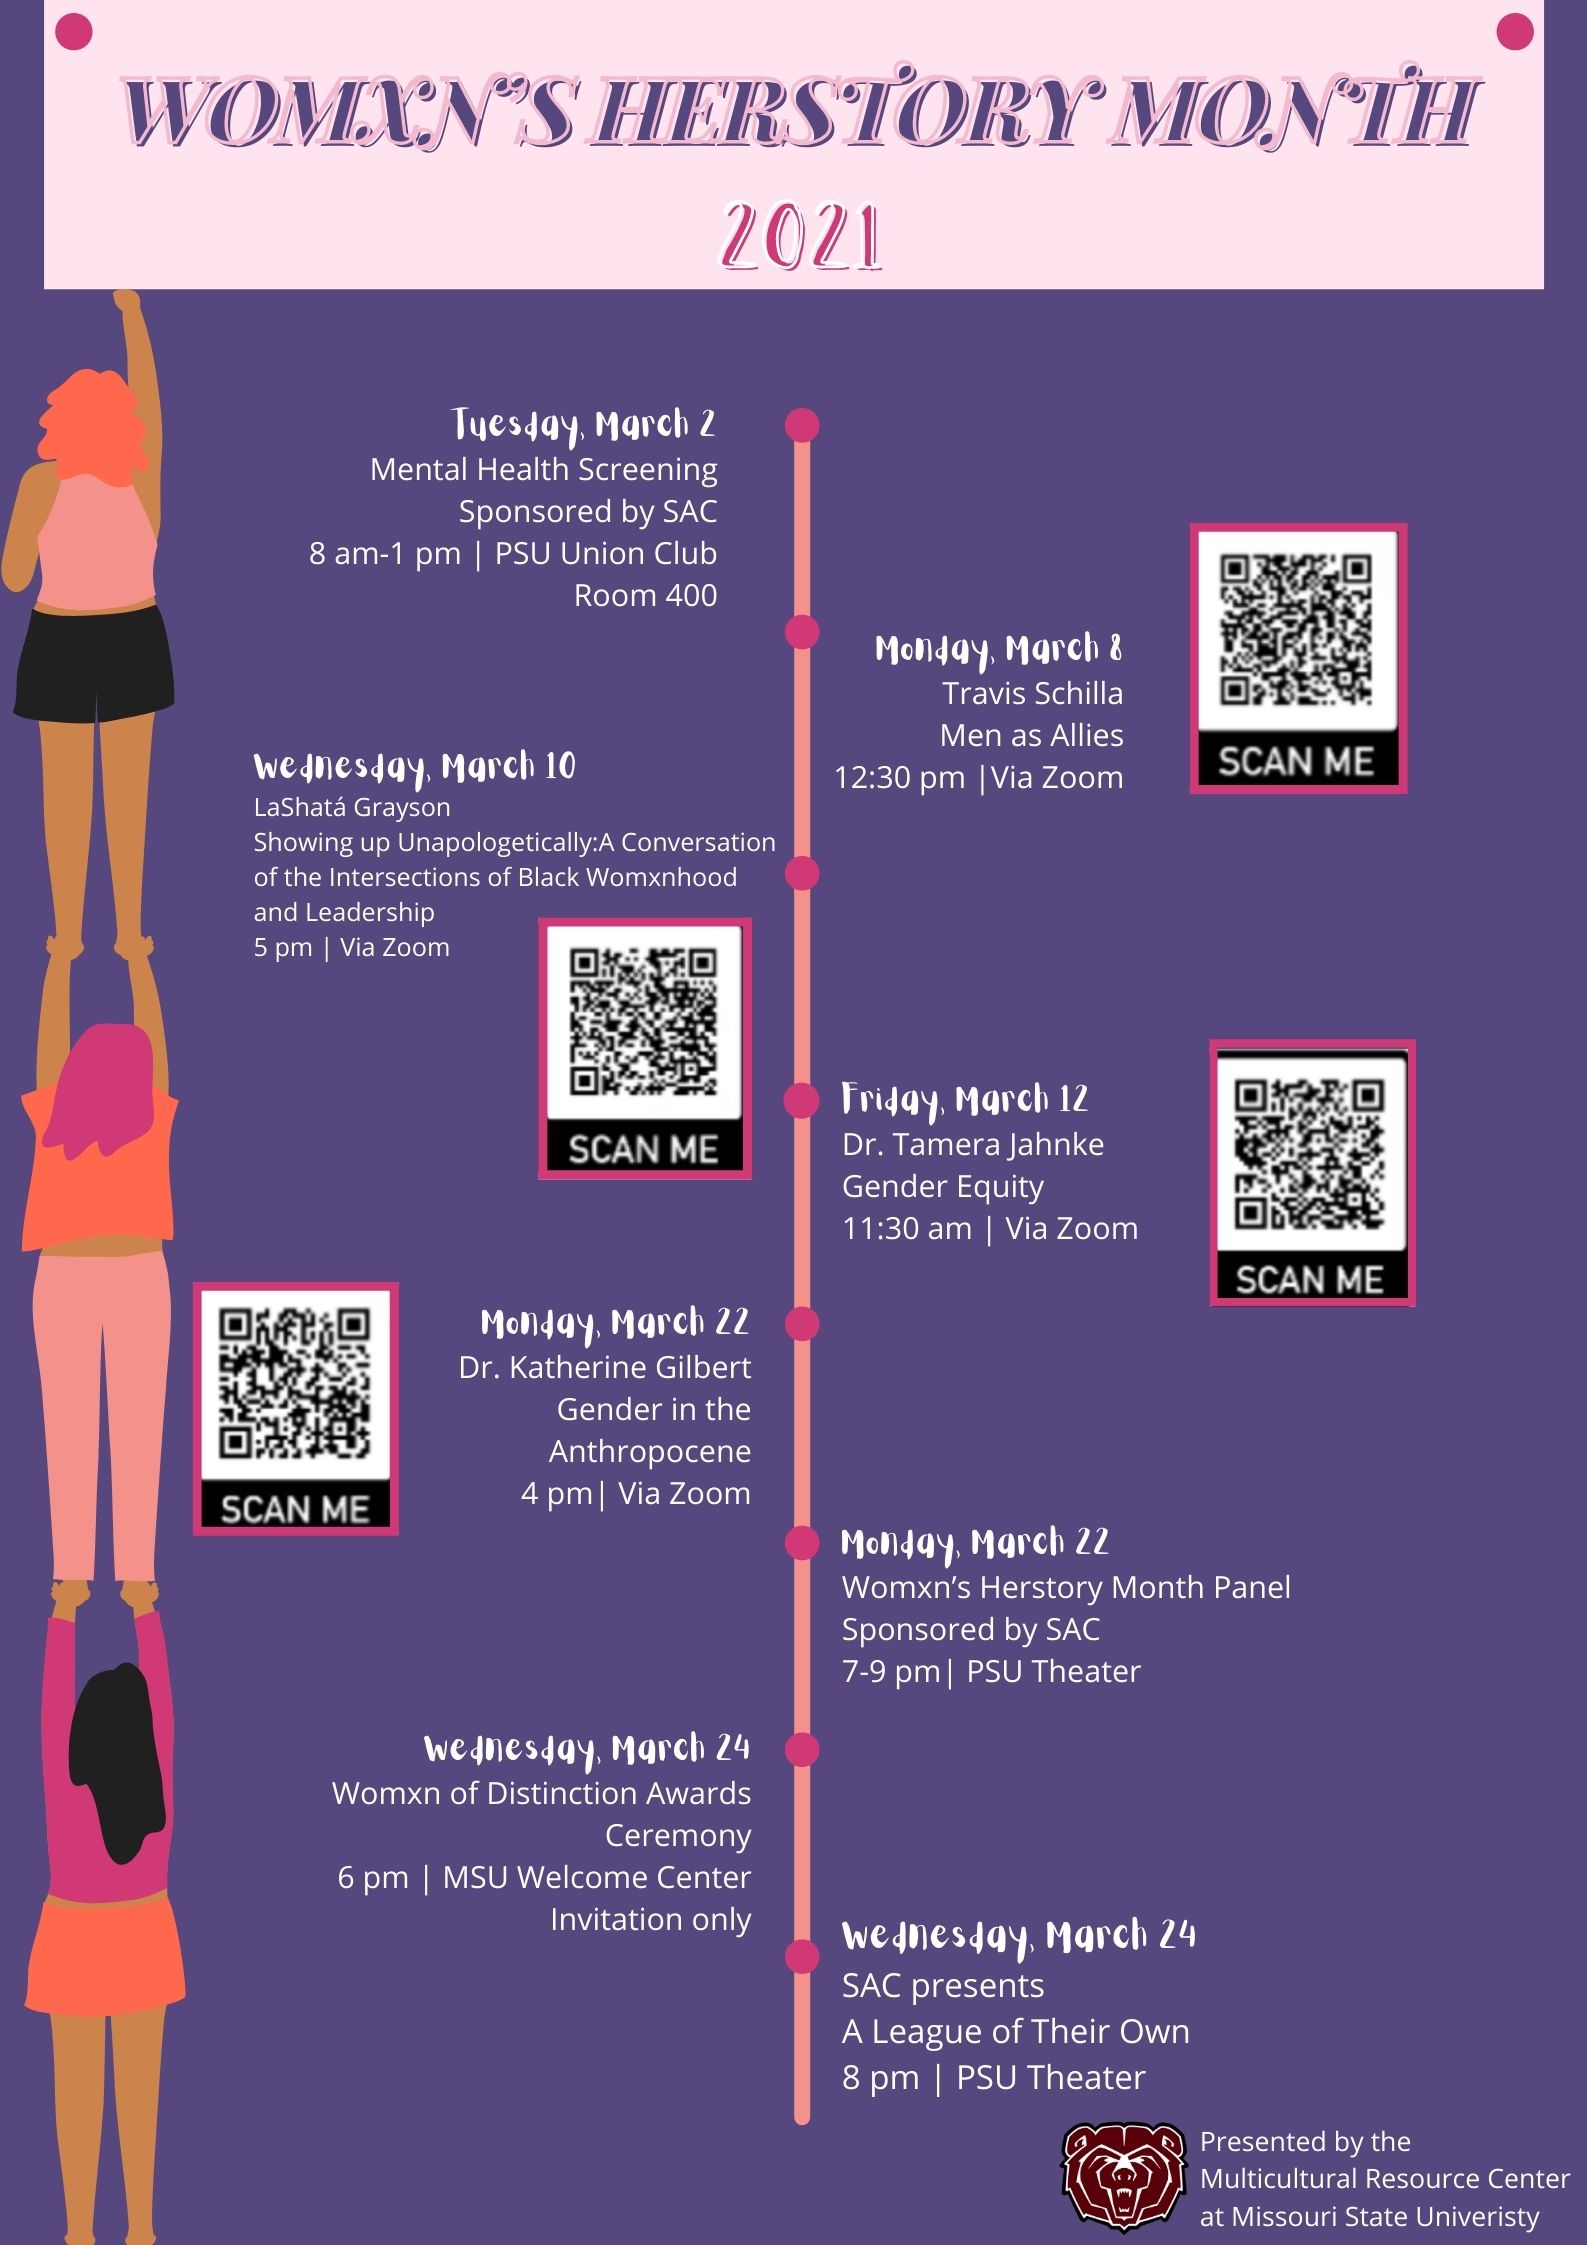 Calendar listing Womens History Month events